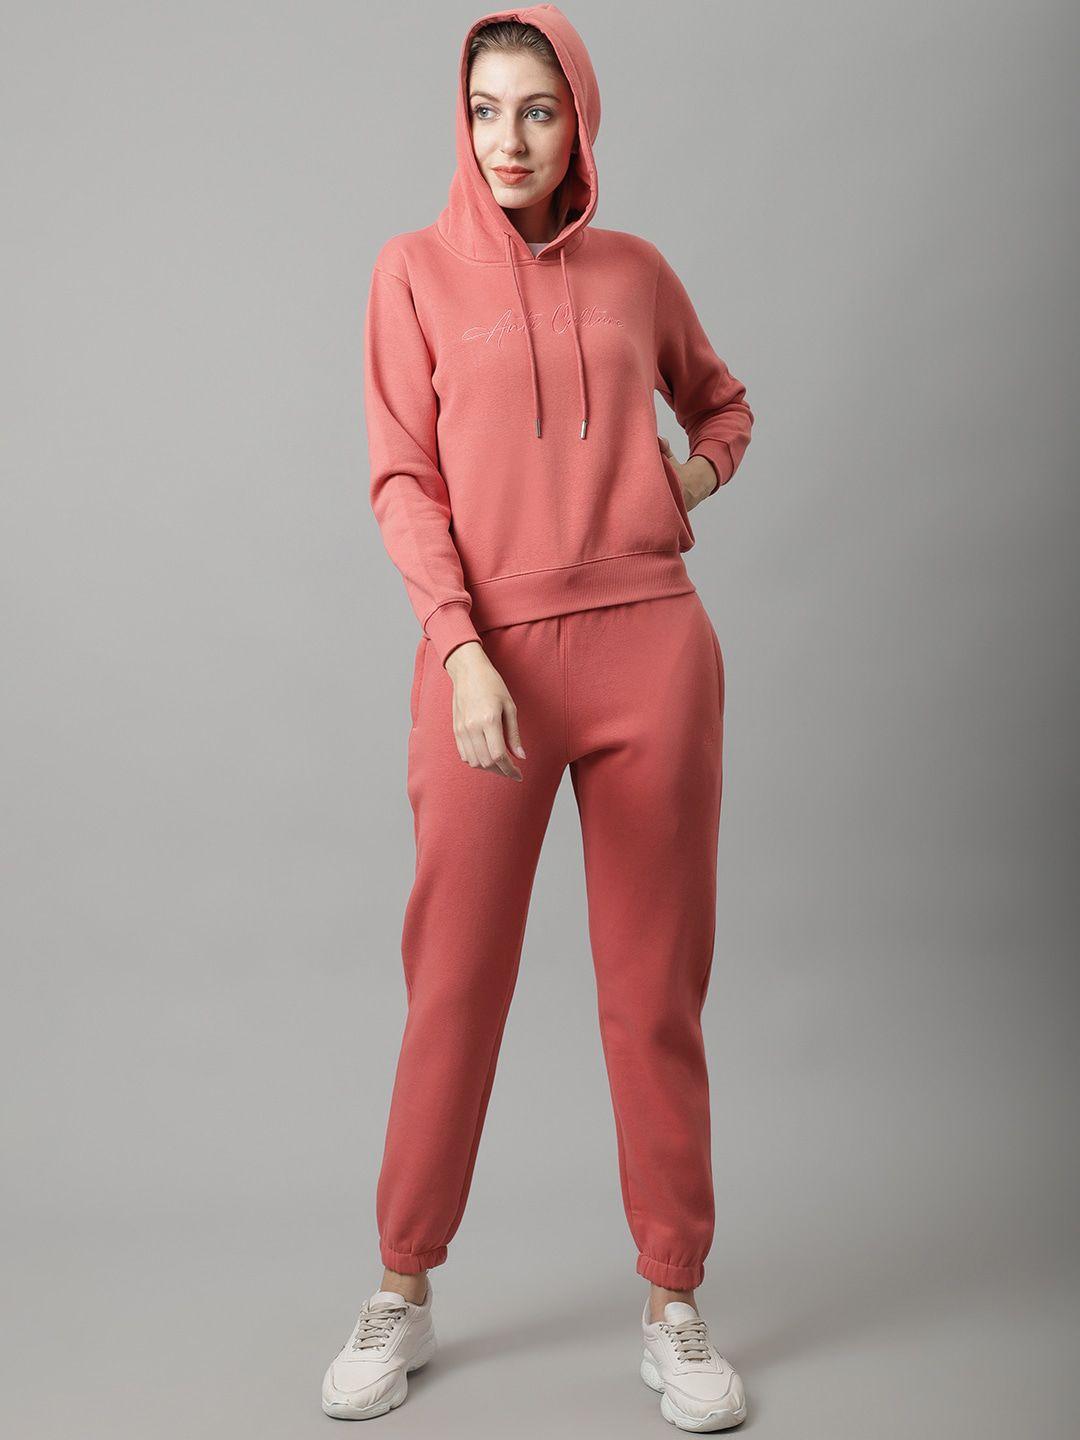 anti culture women peach -colored solid cotton hooded tracksuits